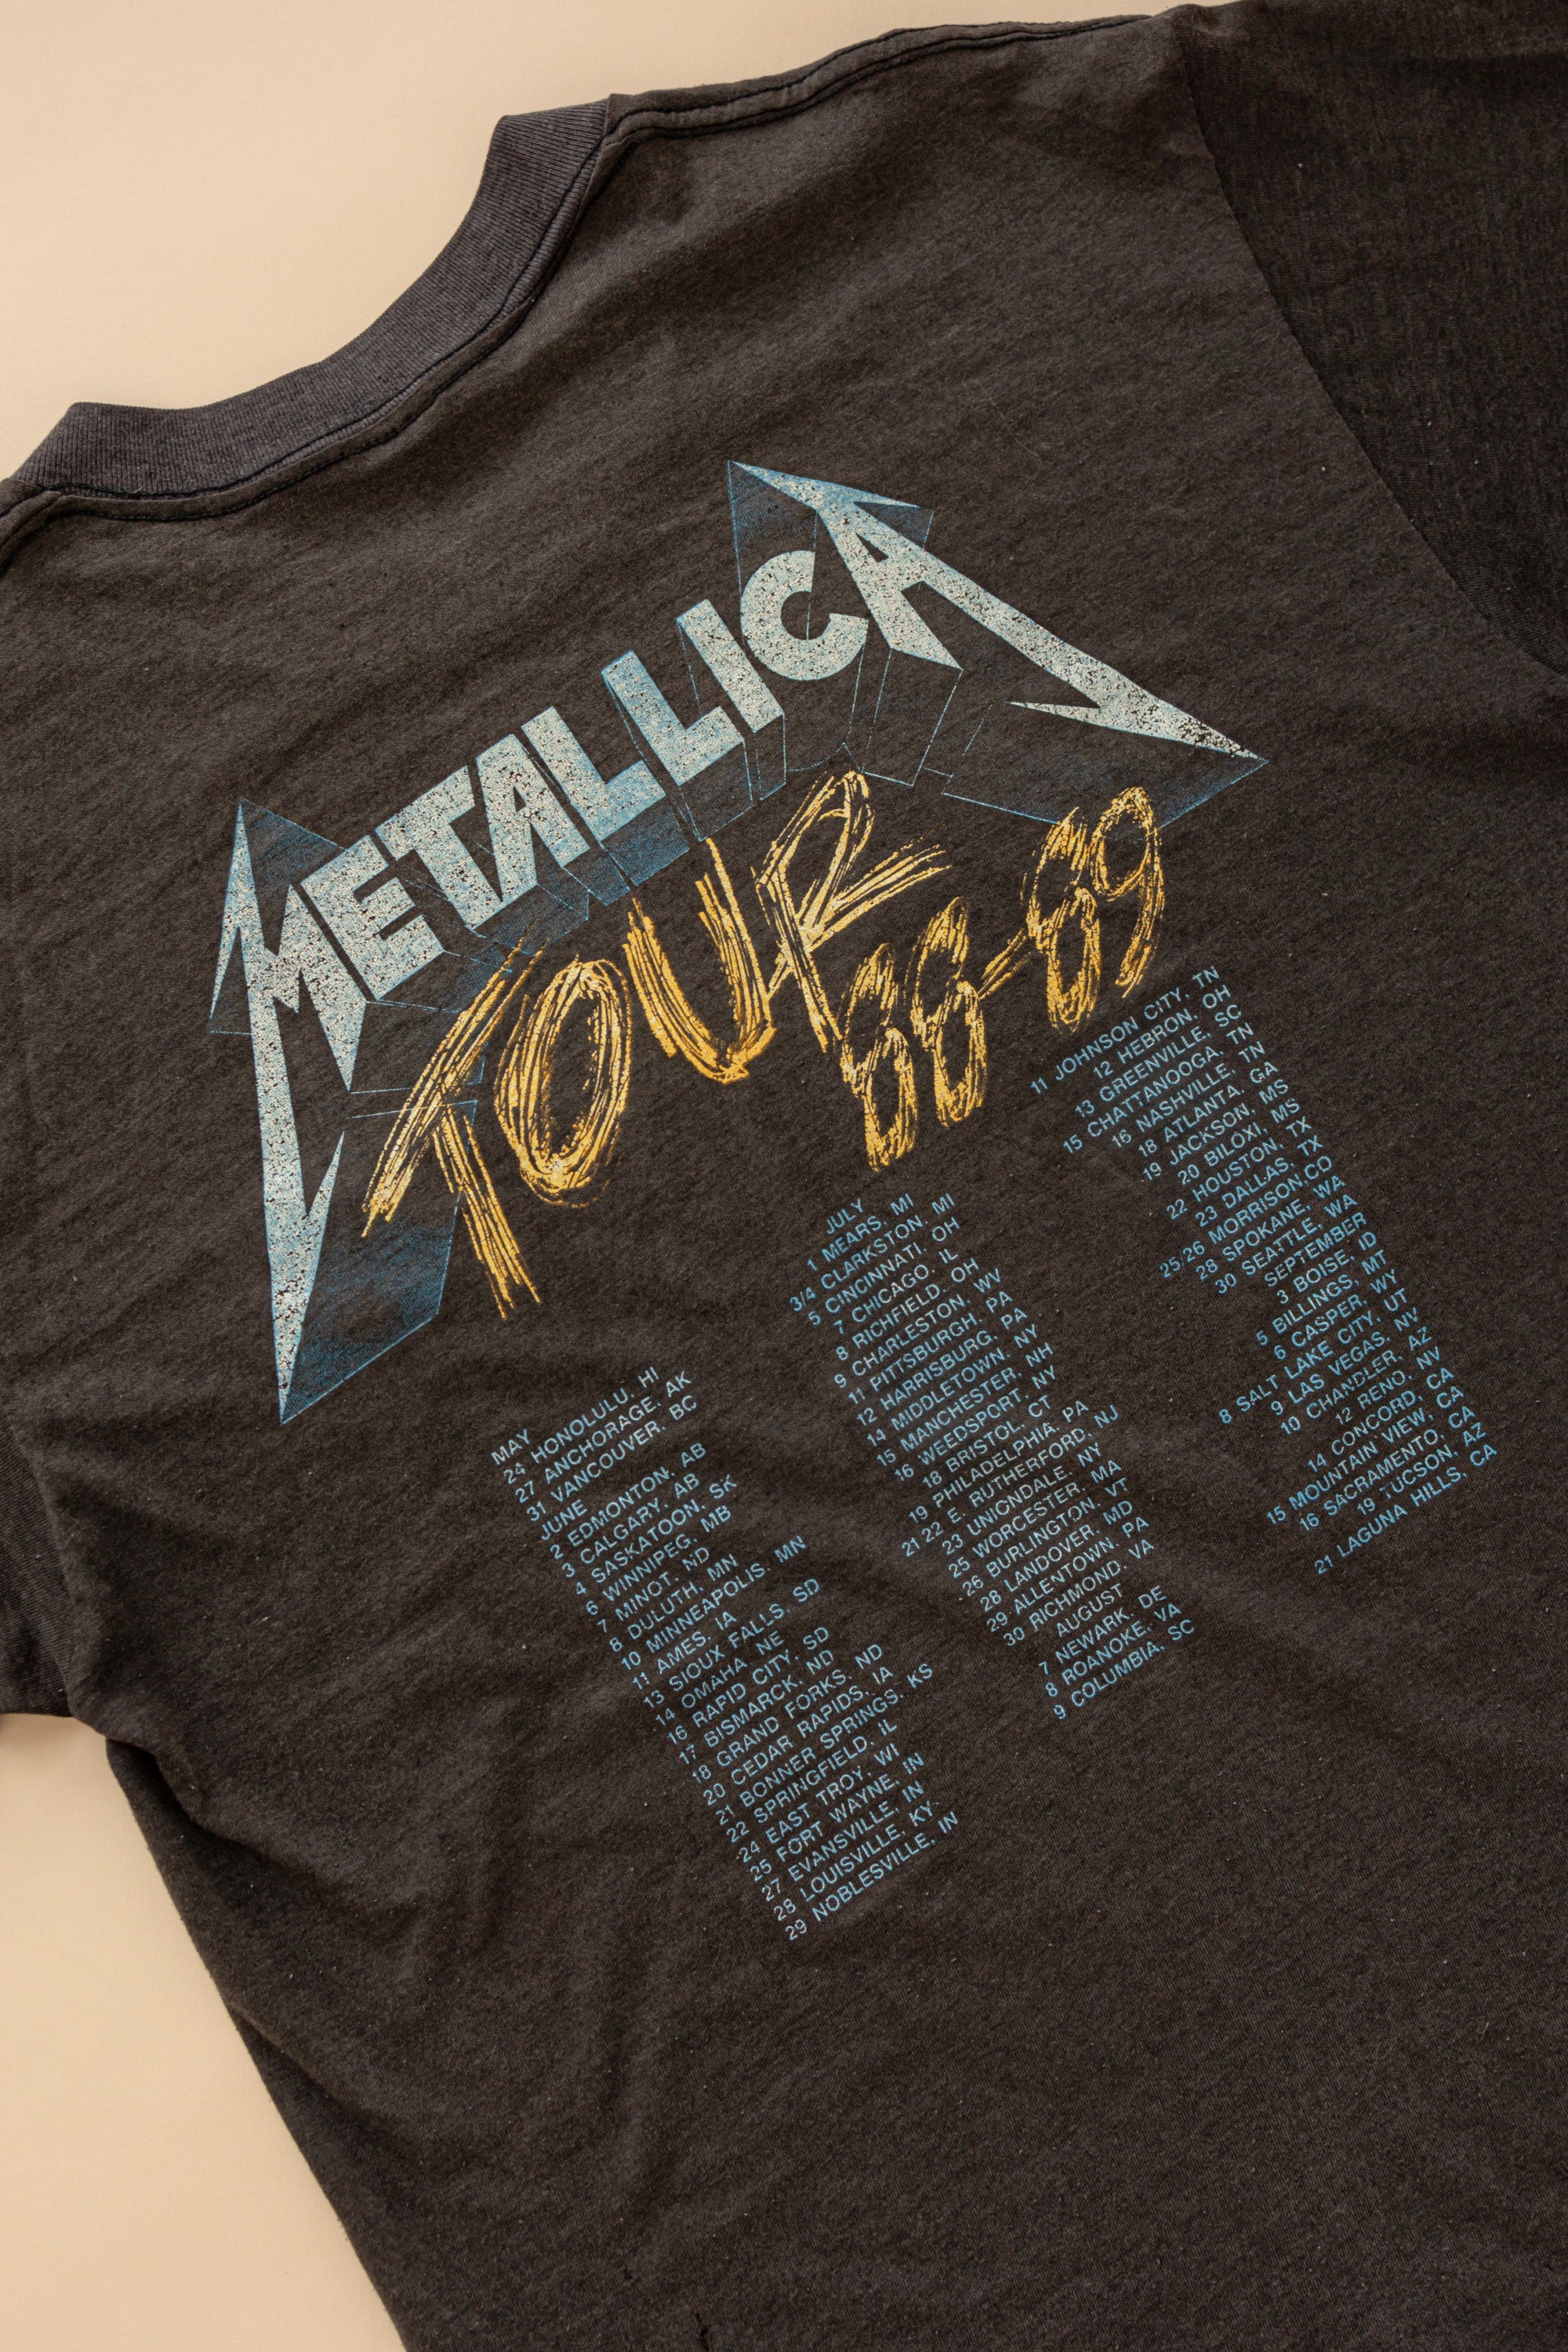 Shirts, Rare Vintage Metallica And Justice For All Tee